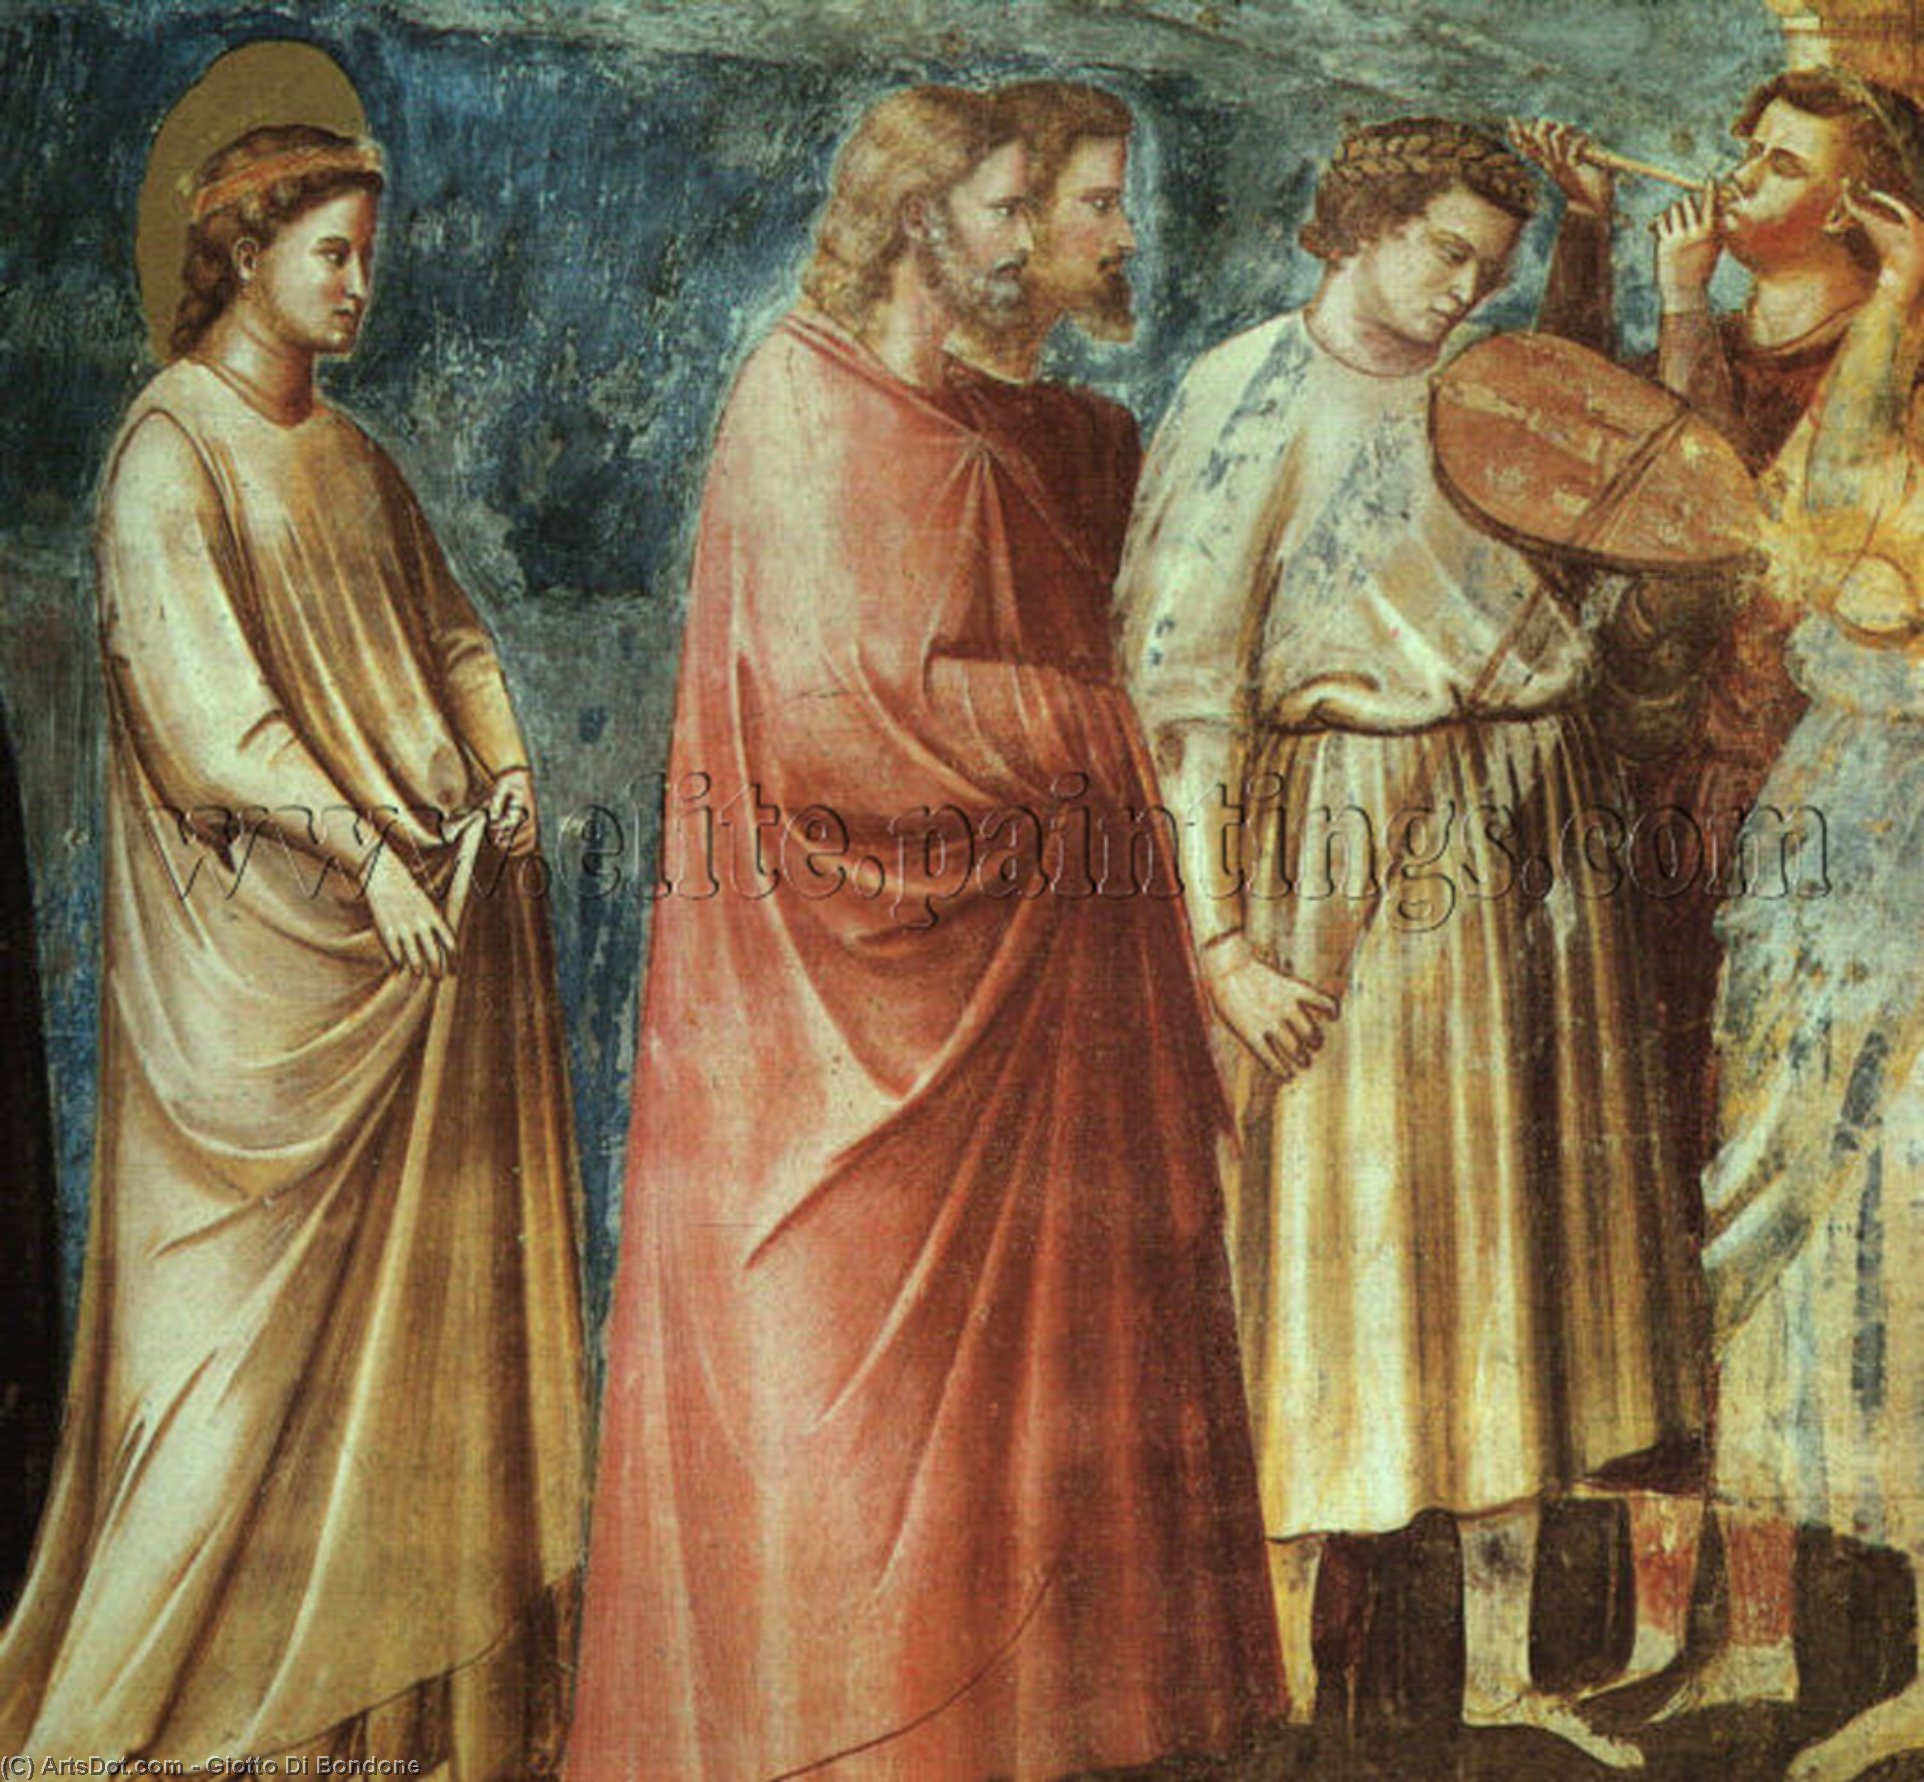 Order Oil Painting Replica No. 12 Scenes from the Life of the Virgin: 6. Wedding Procession (detail), 1304 by Giotto Di Bondone (1267-1337, Italy) | ArtsDot.com